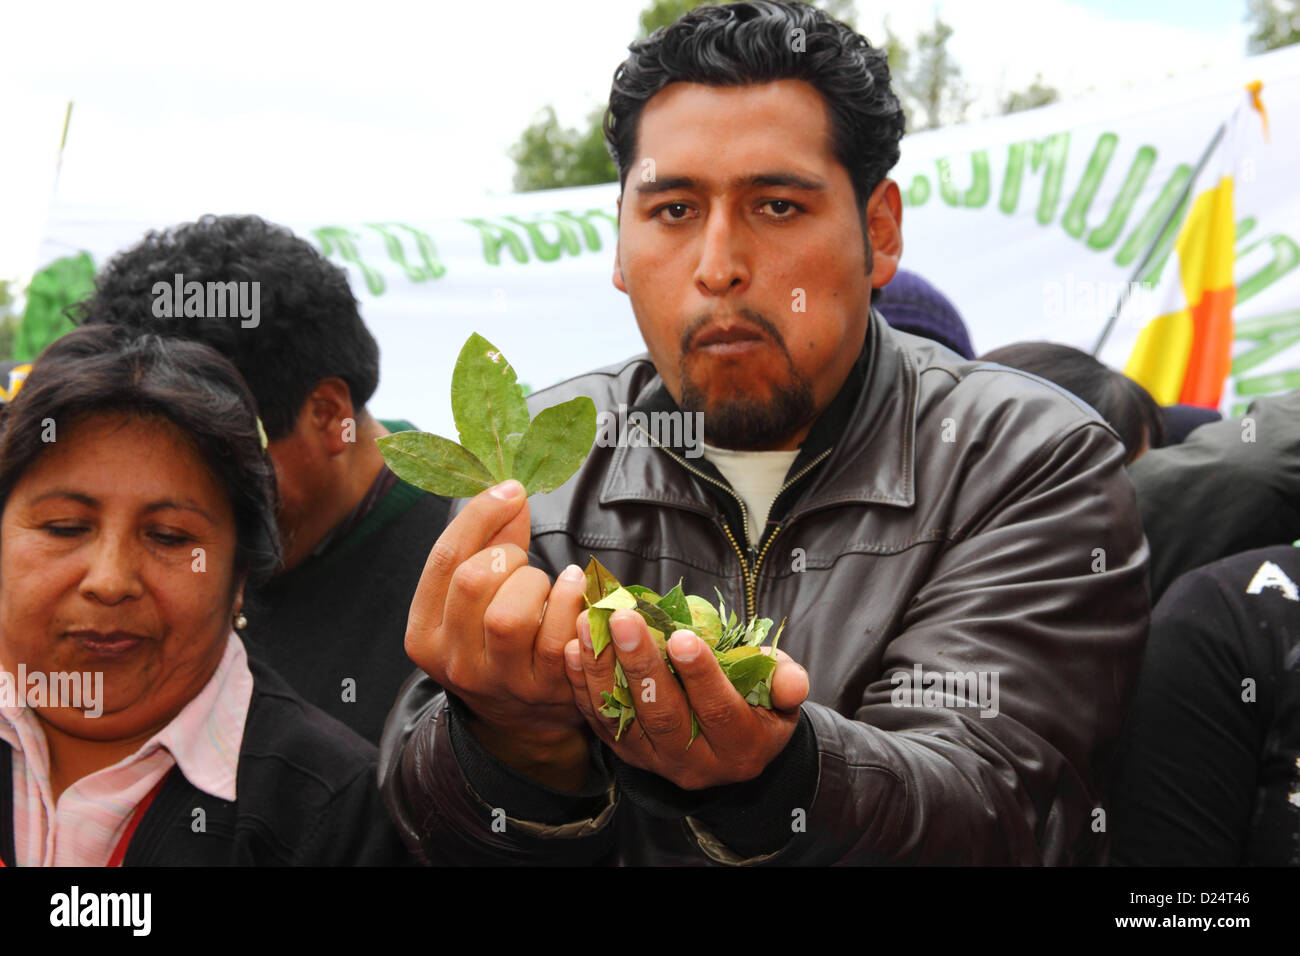 LA PAZ, BOLIVIA, 14th January. A person holds coca leaves at an event to celebrate Bolivia rejoining the 1961 UN Single Convention on Narcotic Drugs. Bolivia formally withdrew from the Convention in 2011 and had been campaigning for clauses banning traditional uses of the coca leaf to be removed. By the 11th January 2013 deadline only 15 countries (less than the 62 required to block the proposal) had registered an objection to Bolivia rejoining the Convention with special dispensations. Rejoining will come into effect from 10th February 2013. Stock Photo